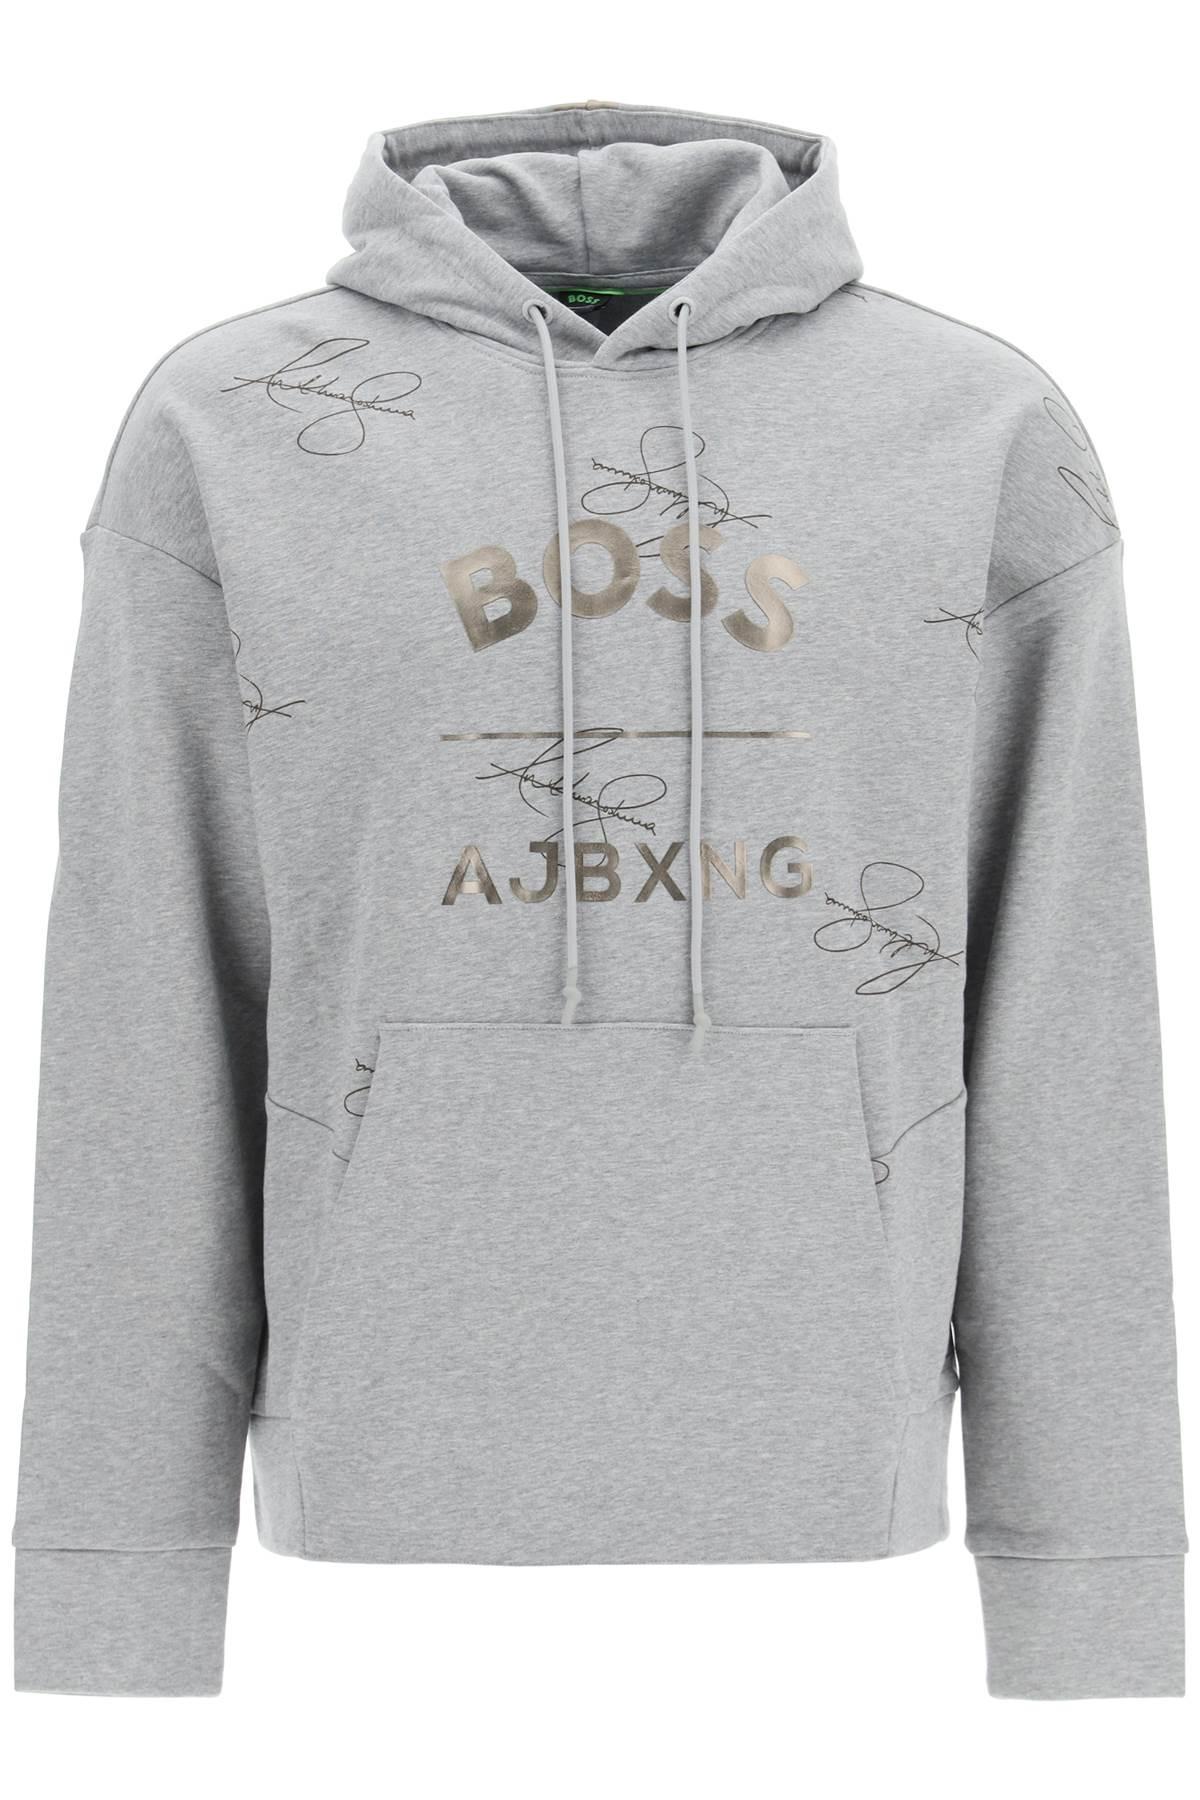 BOSS by HUGO BOSS Signature Hoodie X Ajbxng in Gray for Men | Lyst